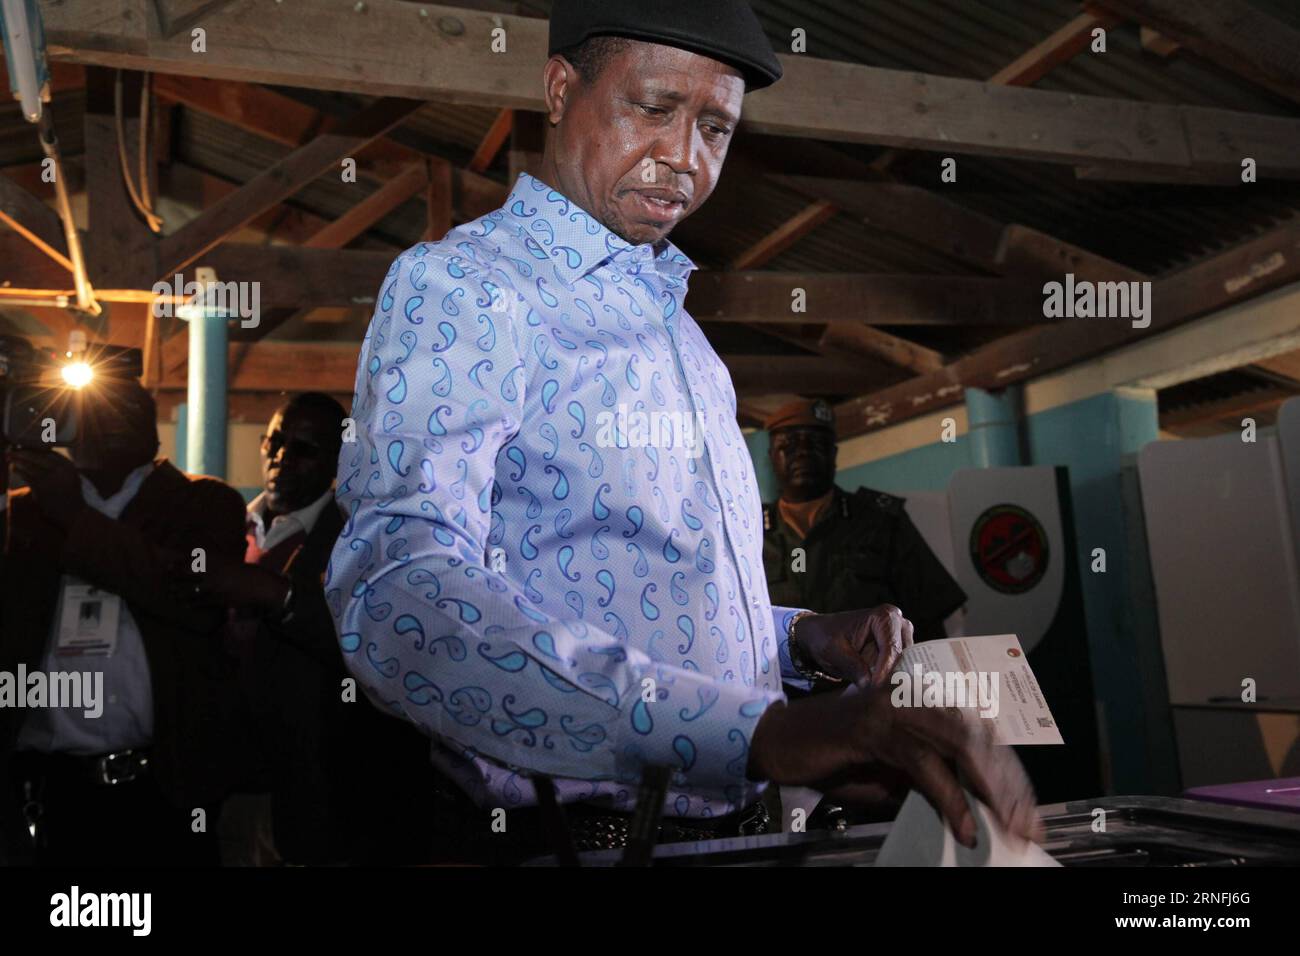 (160811) -- LUSAKA, Aug. 11, 2016 -- Zambian incumbent President, the presidential candidate of the ruling Patriotic Front (PF) Edgar Lungu casts his vote at a polling station in Lusaka, Zambia, Aug. 11, 2016. Polling started Thursday morning for Zambia s general elections and referendum. About 6.7 million registered voters are expected to cast their ballots at nearly 7,700 polling stations across the country, which opened from 6 a.m to 6 p.m. Penglijun) (yk) ZAMBIA-LUSAKA-VOTE PengxLijun PUBLICATIONxNOTxINxCHN   160811 Lusaka Aug 11 2016 Zambian incumbent President The Presidential Candidate Stock Photo